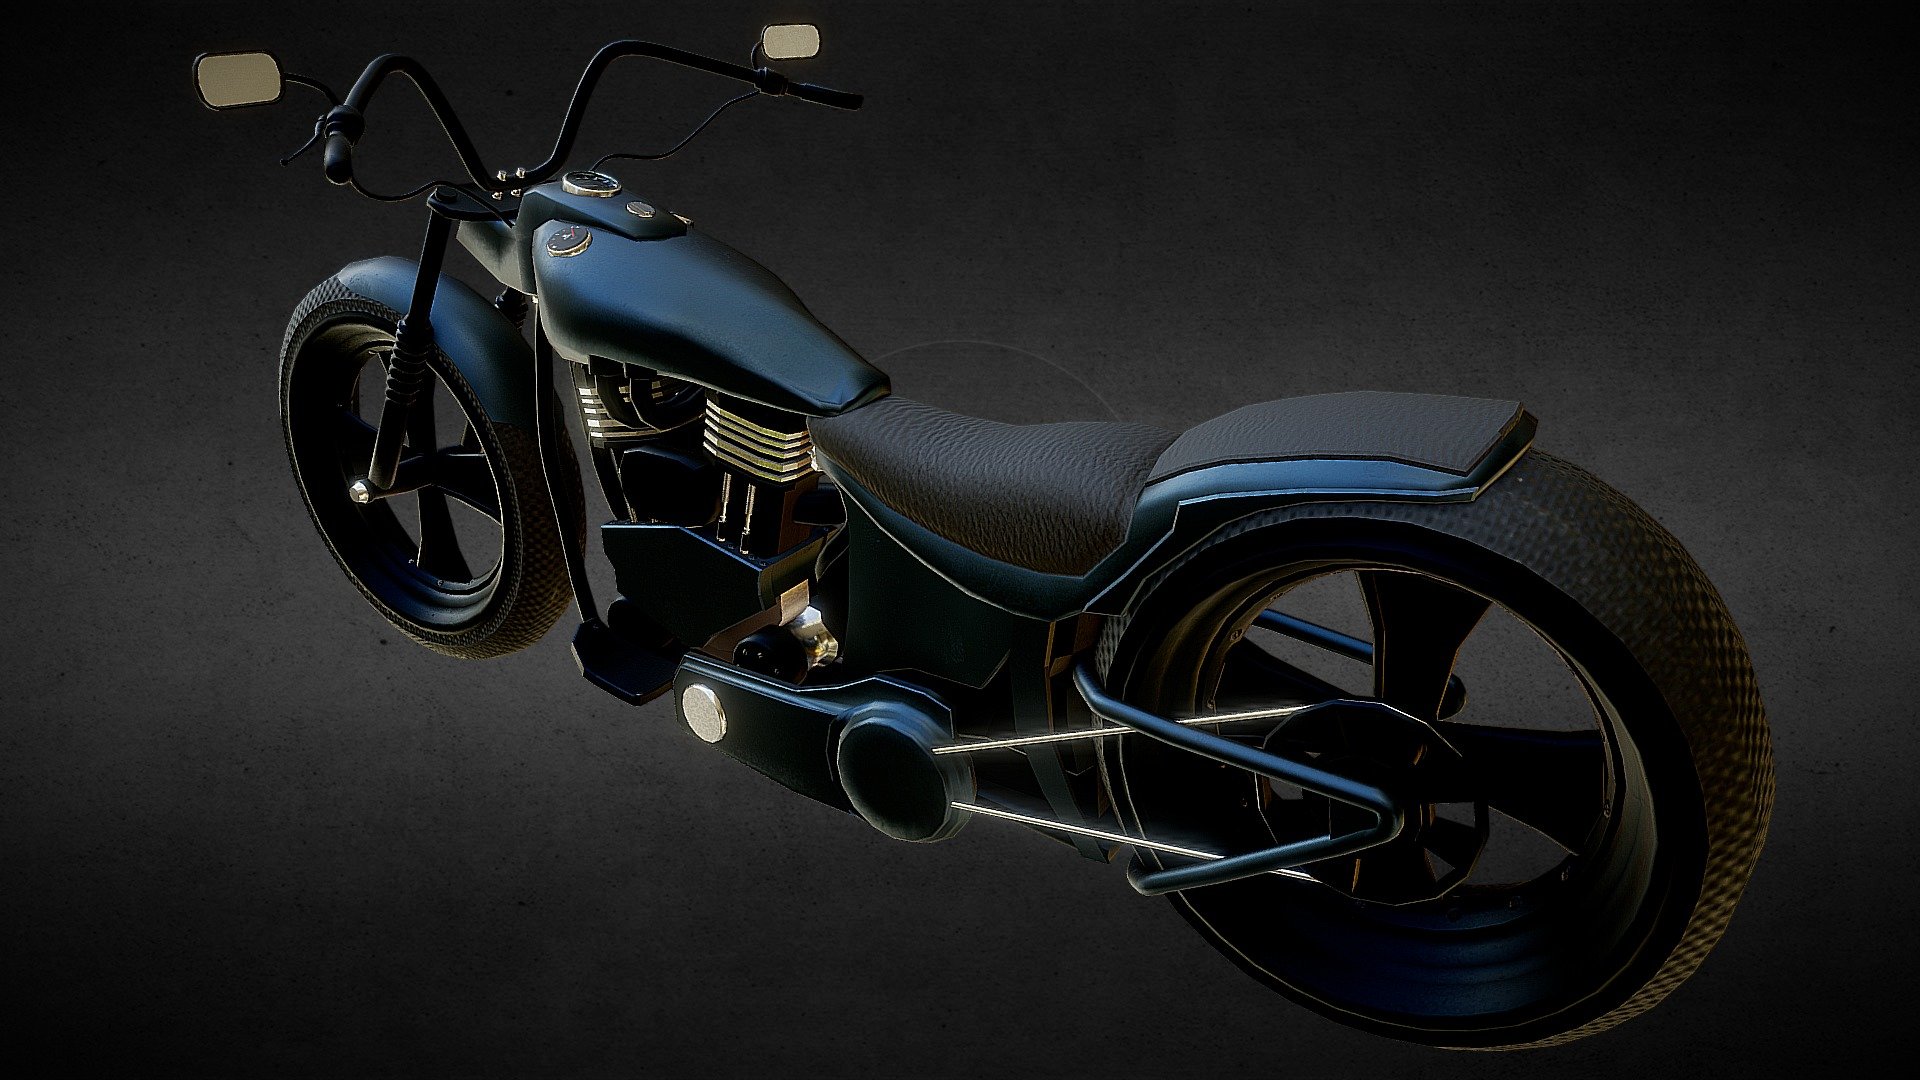 I recently re-uploaded this model, almost two years ago I worked on a model of a Harley Motorbike, back then I textured everything in Substance Painter. I recently started using quixel and thought I would go back to an old model to practice. Here is the re-work with some minor model adjustments and major  UVW changes 3d model